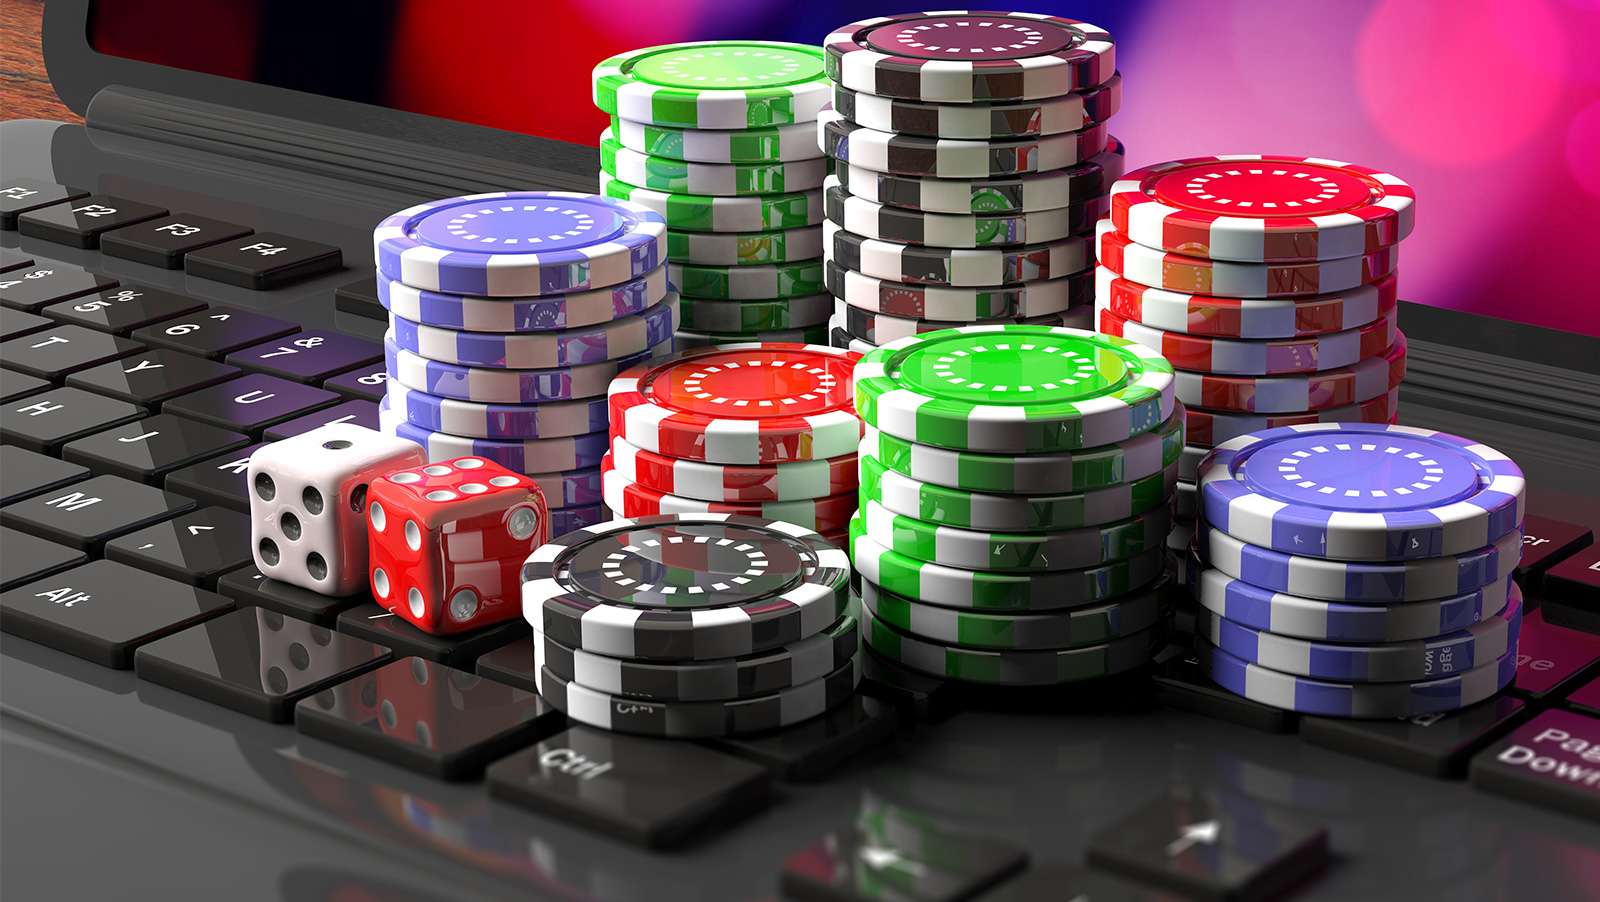 Online casino Malaysia as beautiful gambling websites! Some facts shared in the article 